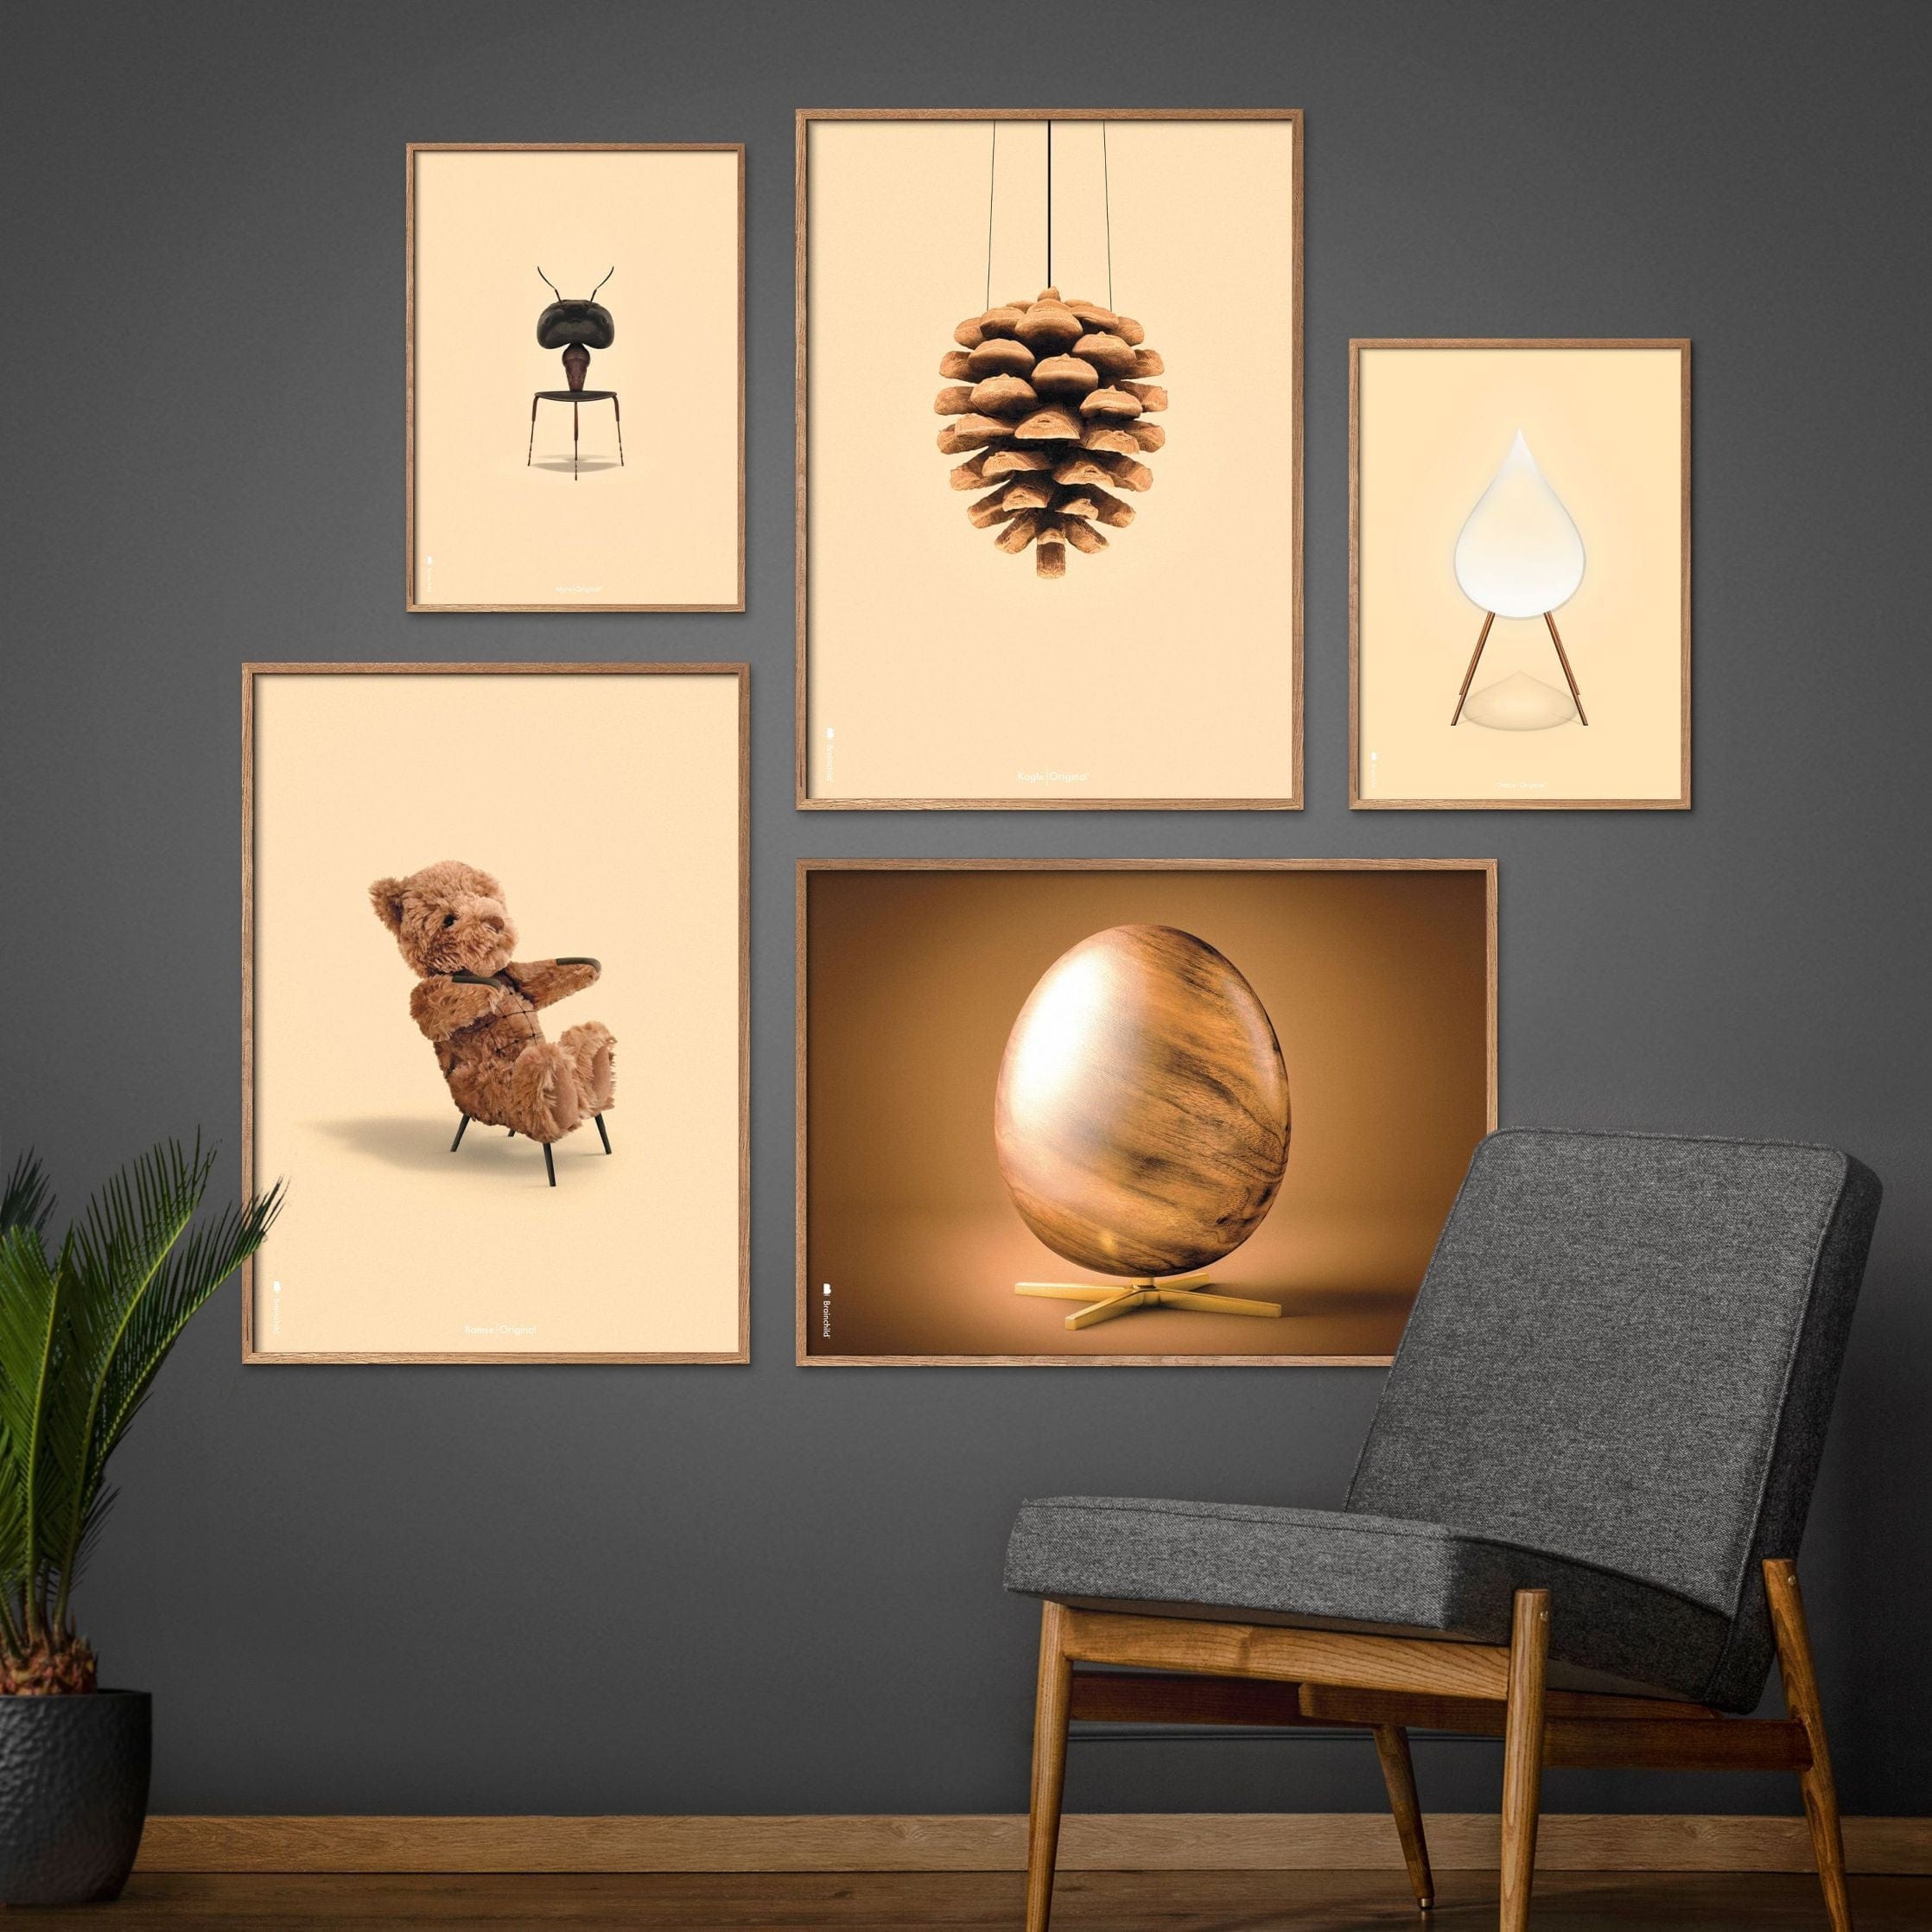 Brainchild Ant Classic Poster, Frame Made Of Light Wood A5, Sand Colored Background